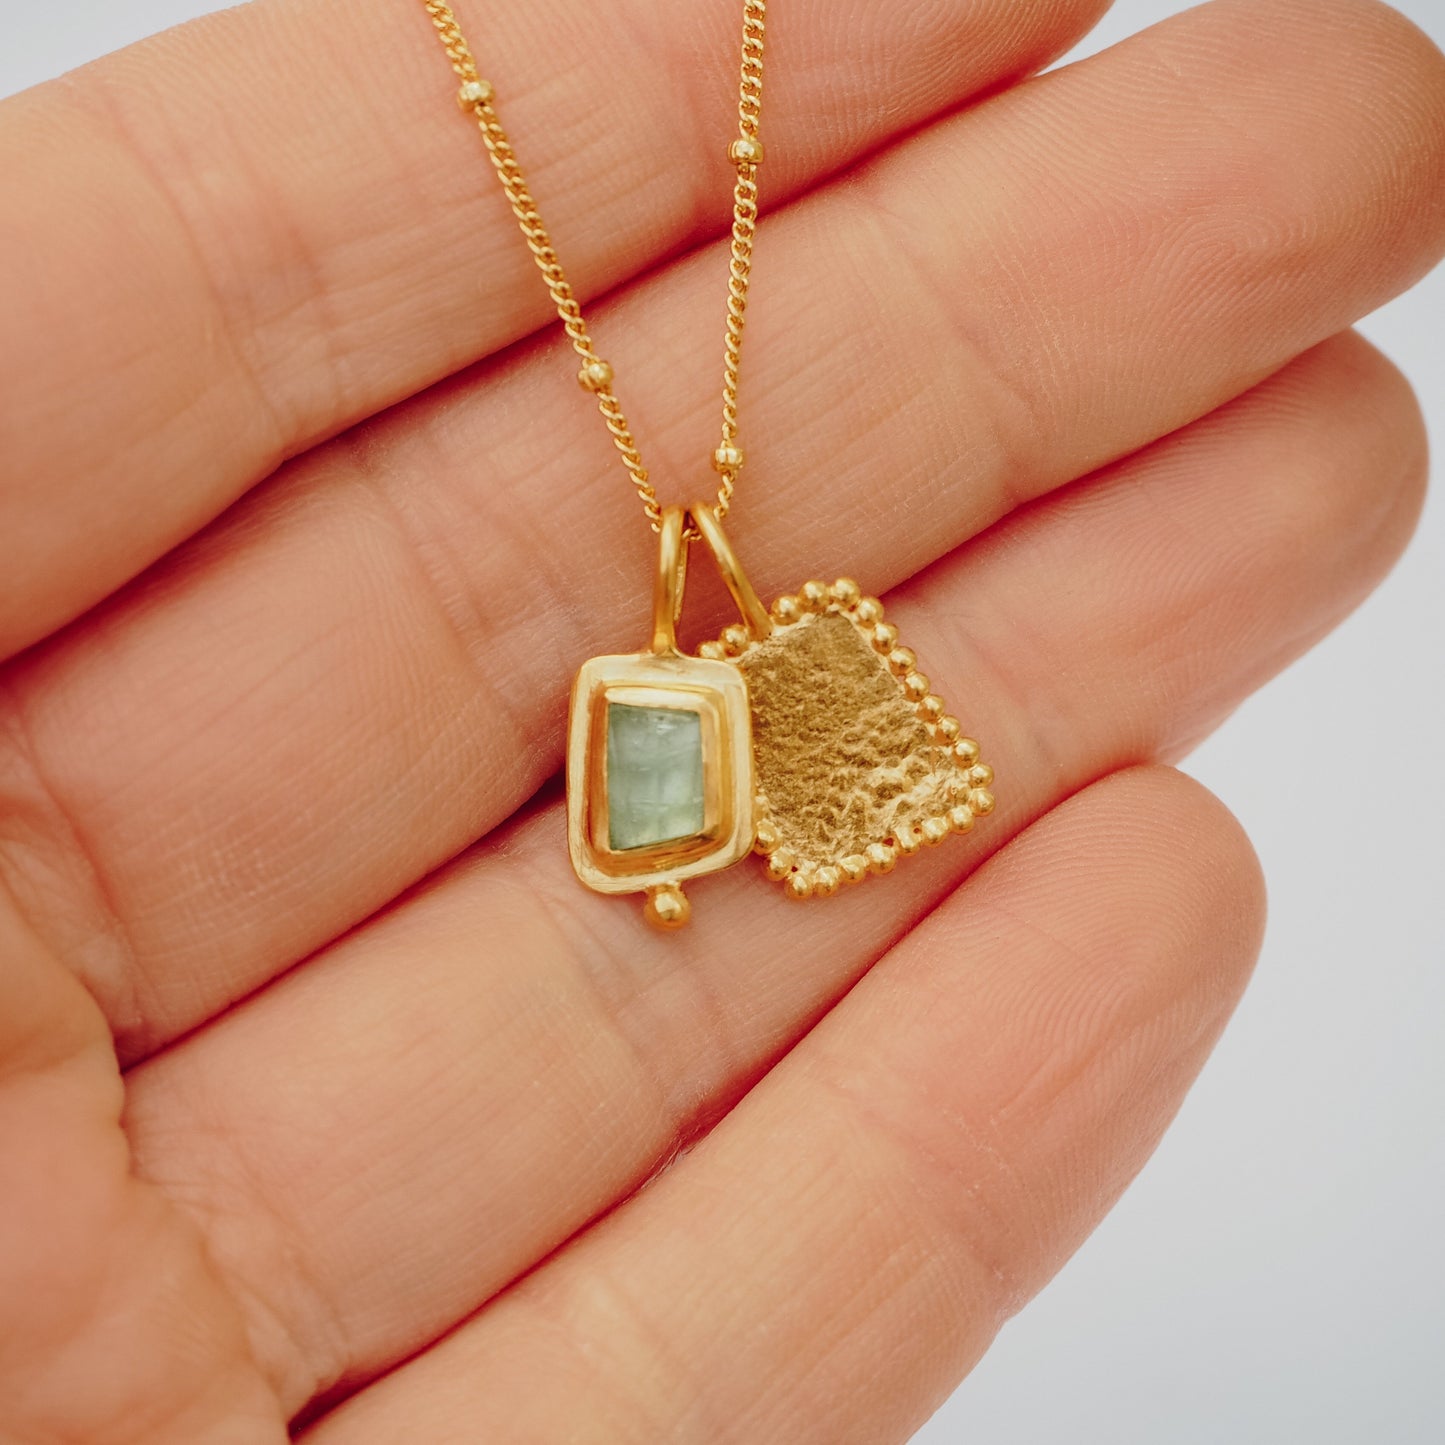 Delicate square gold pendant adorned with a mesmerizing blue rose cut tourmaline gemstone and exquisite granulation, hanging gracefully from a satellite chain.